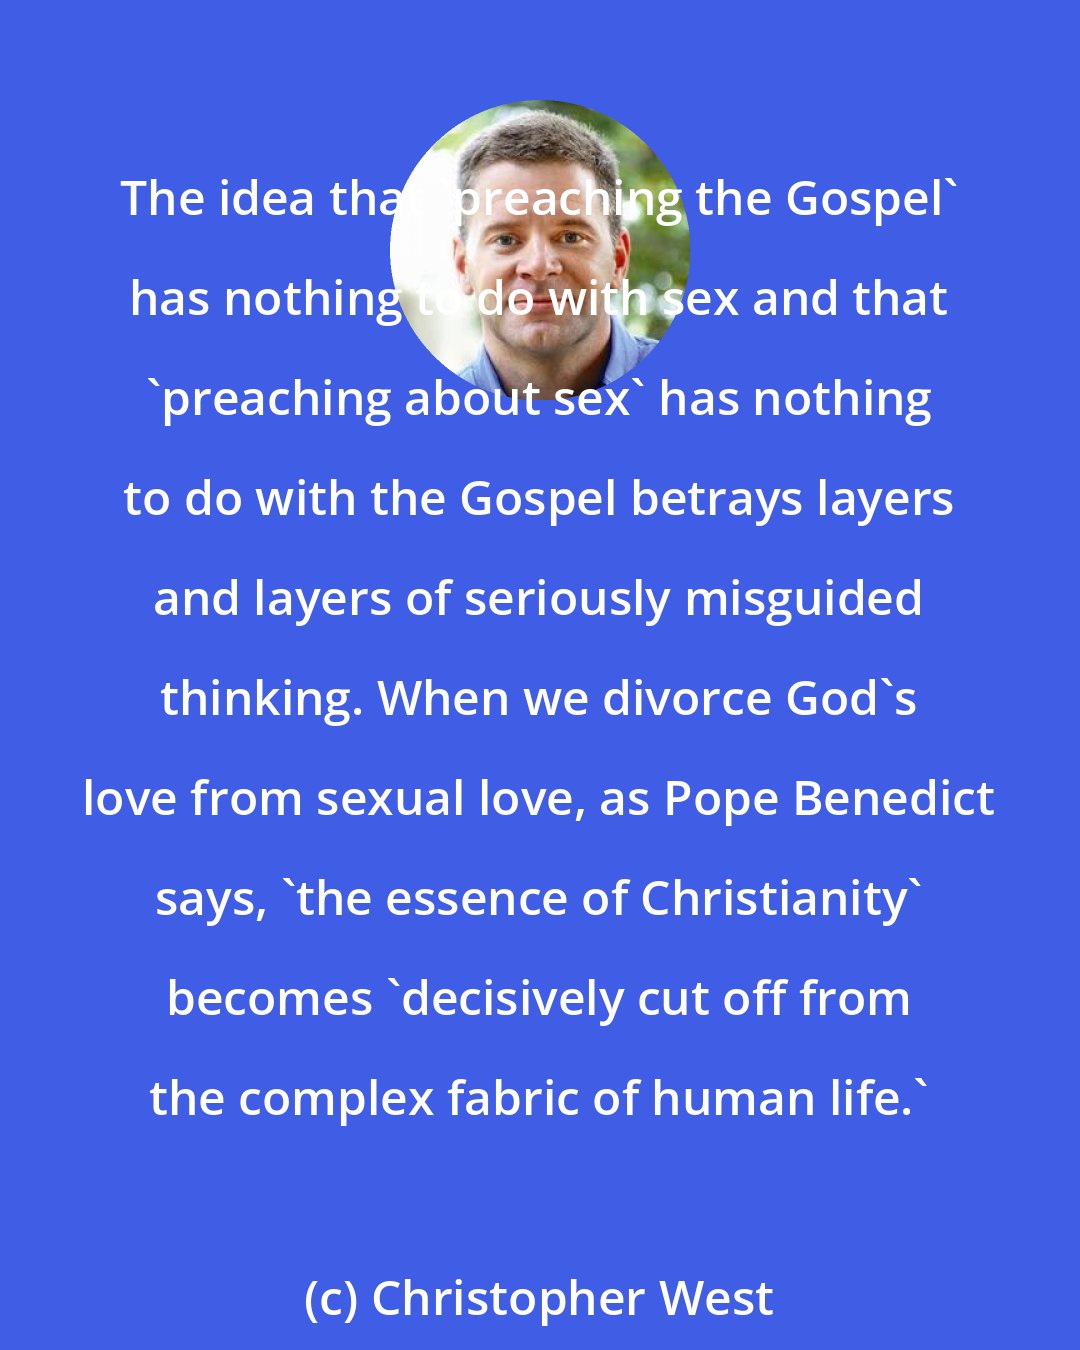 Christopher West: The idea that 'preaching the Gospel' has nothing to do with sex and that 'preaching about sex' has nothing to do with the Gospel betrays layers and layers of seriously misguided thinking. When we divorce God's love from sexual love, as Pope Benedict says, 'the essence of Christianity' becomes 'decisively cut off from the complex fabric of human life.'